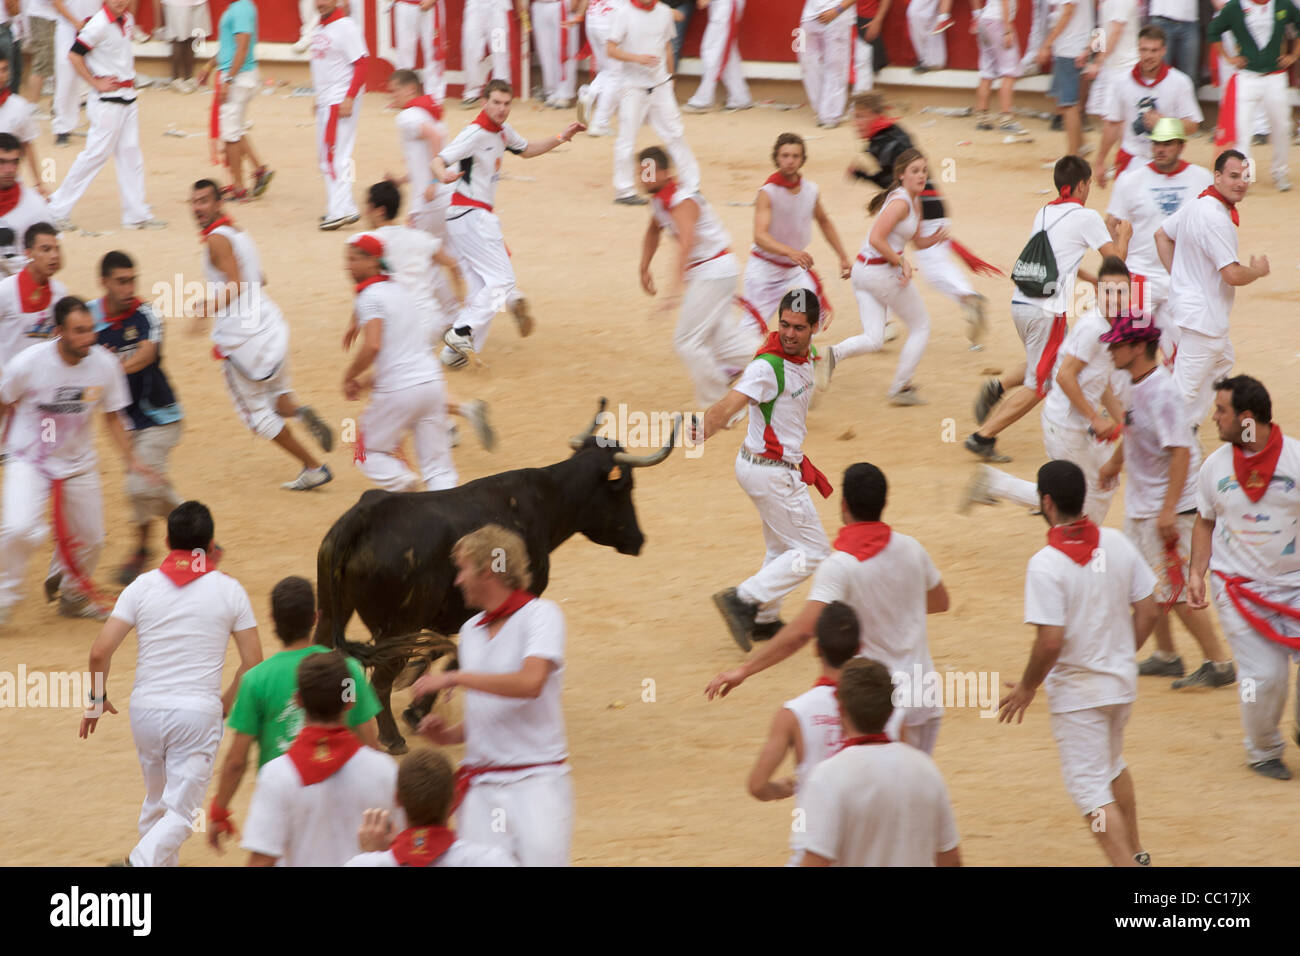 A cow is taunted by the crowd at the festival of San Fermin (aka the running of the bulls) in Pamplona, Spain. Stock Photo